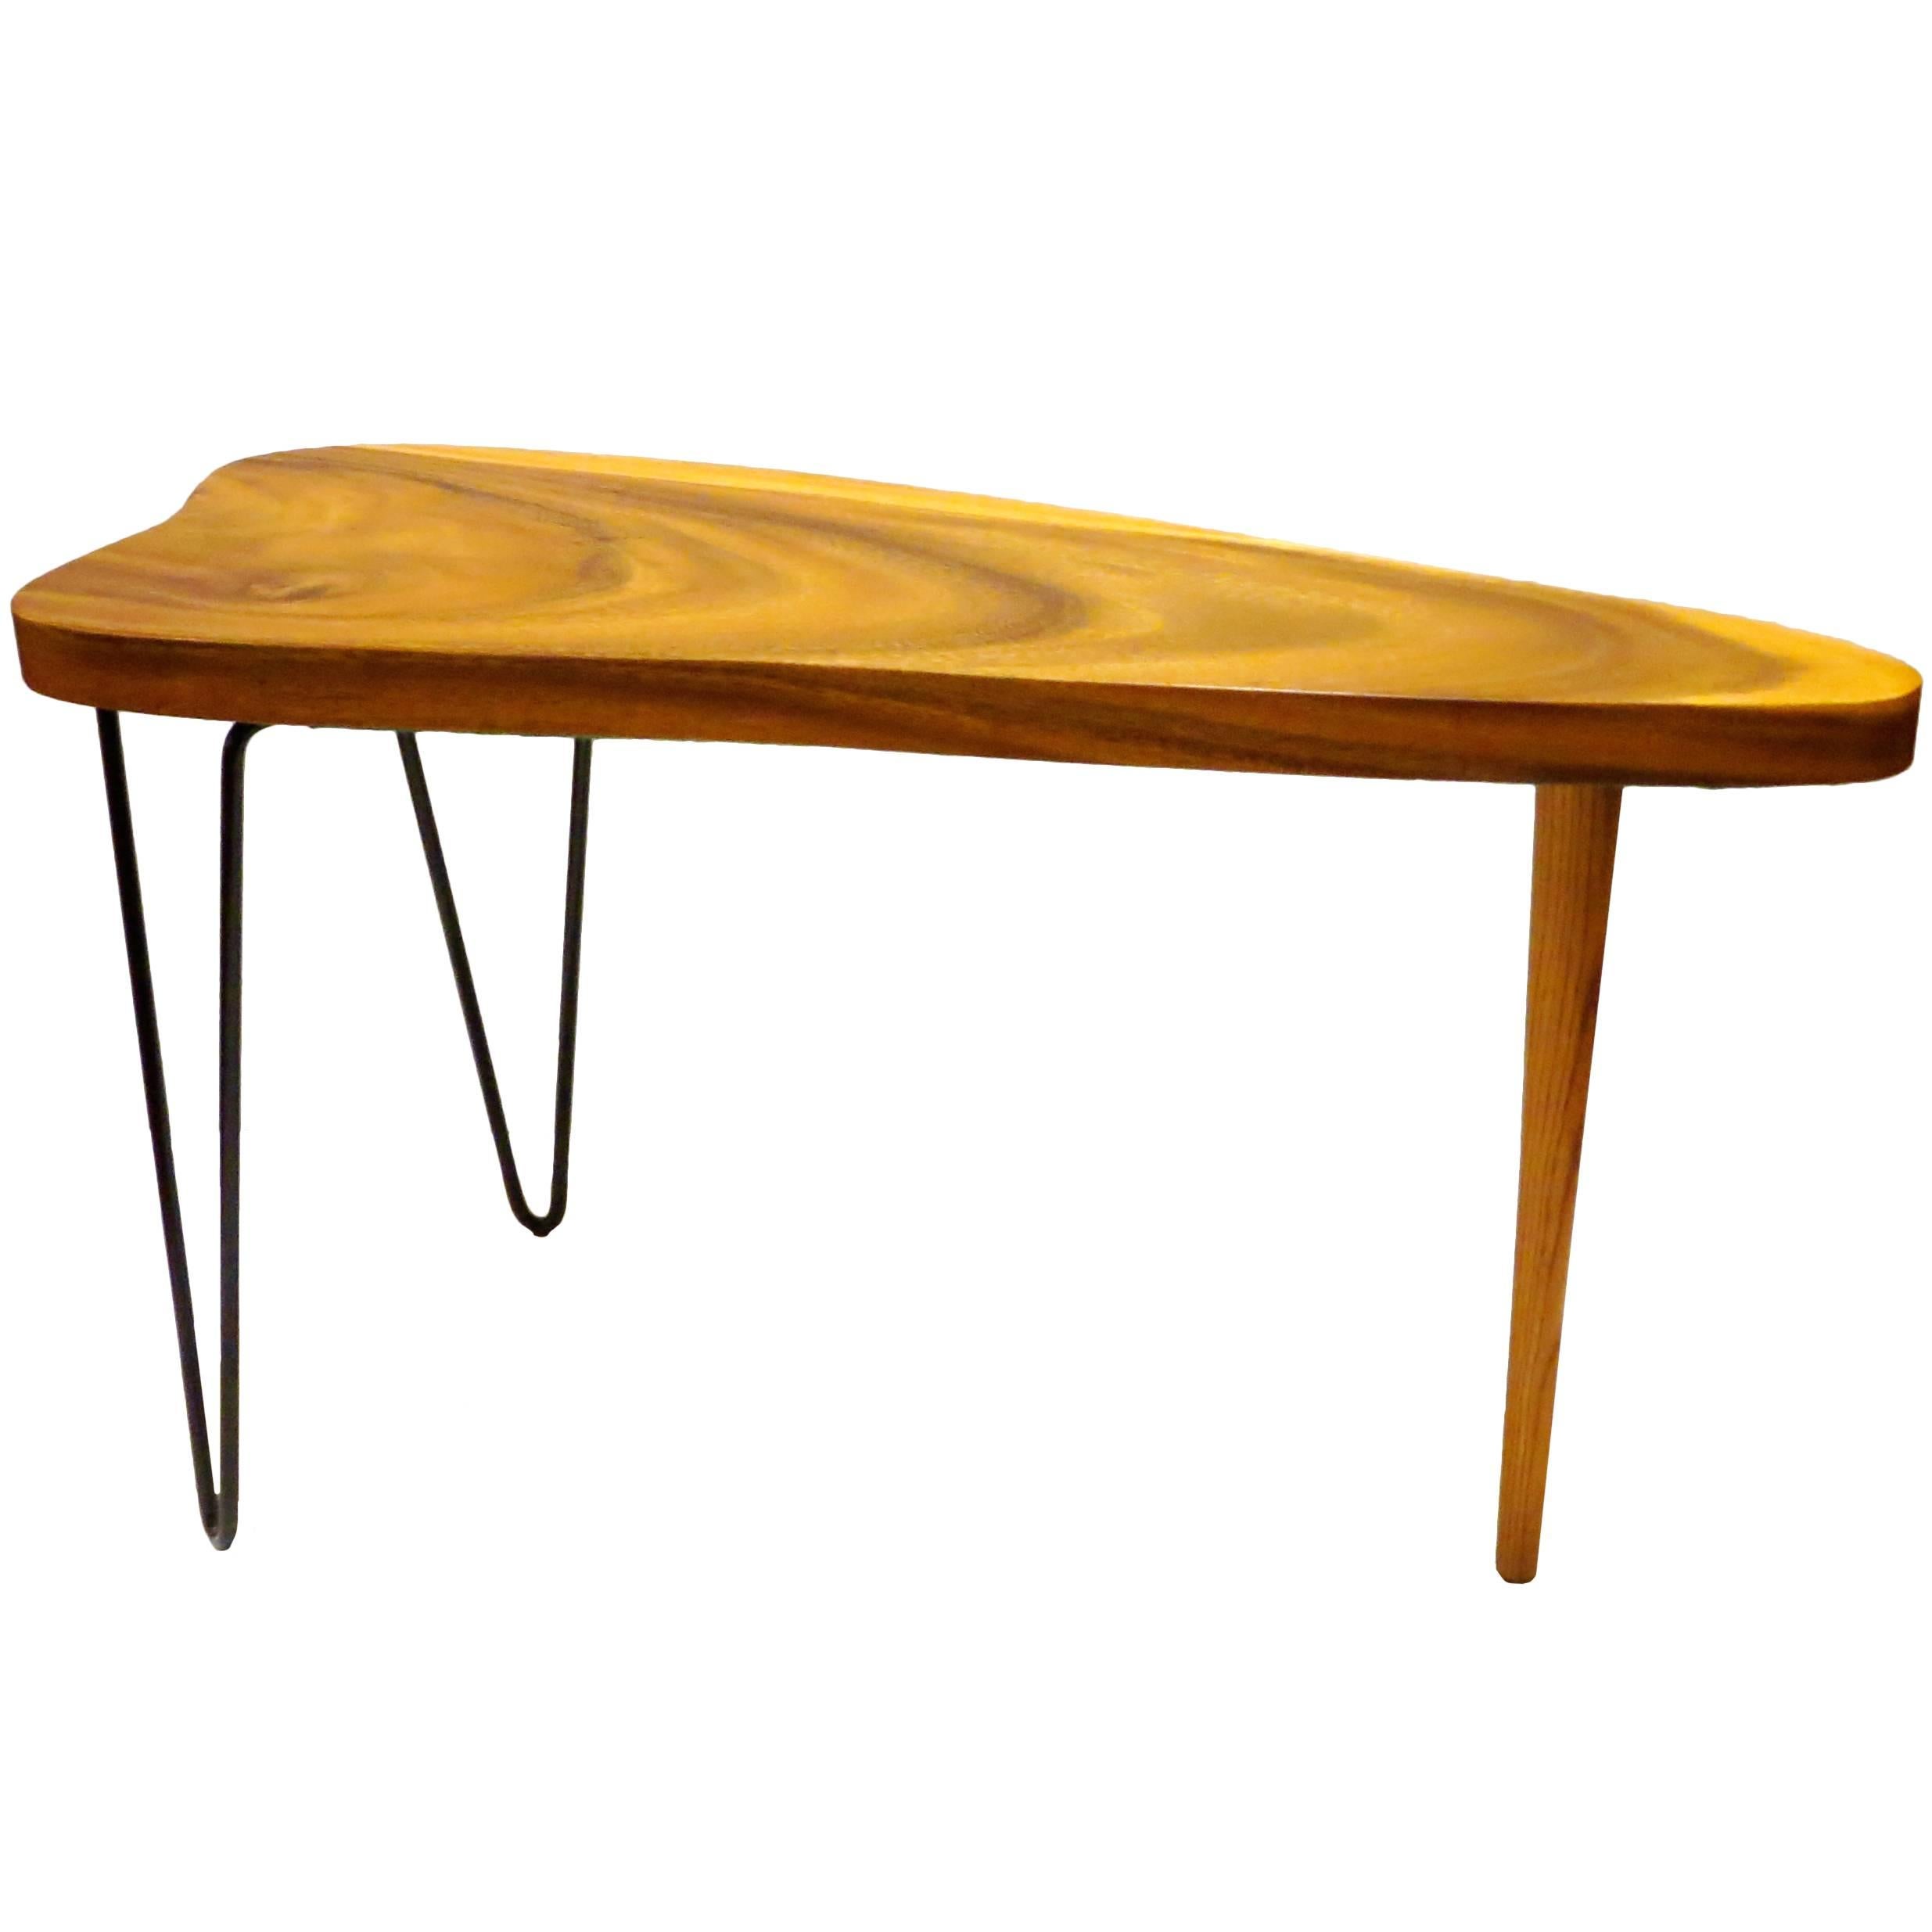 Free-Form Organic Small Coffee or Cocktail Table Koa Wood Top and Hairpin Legs